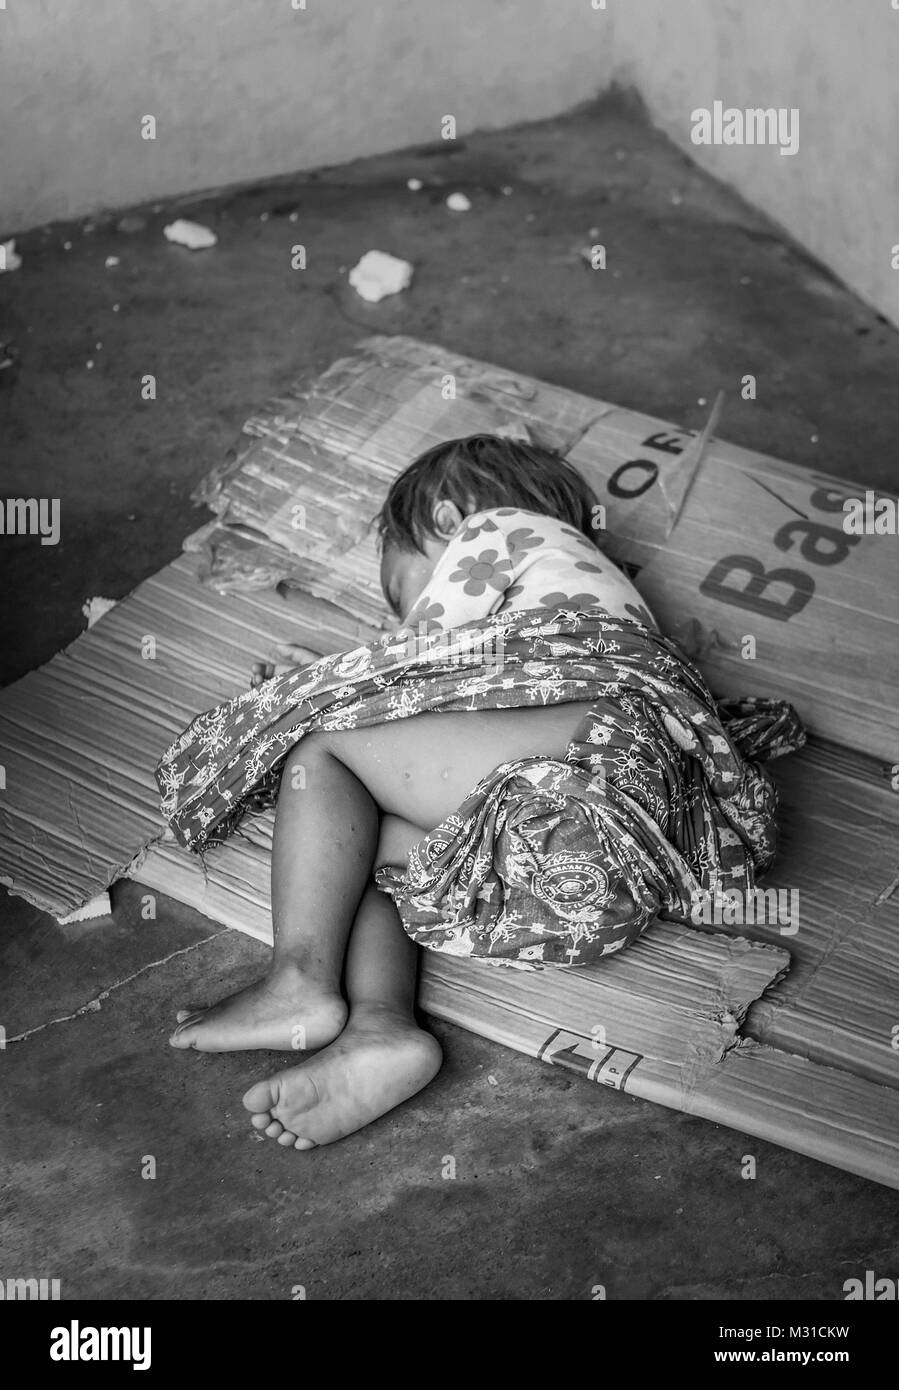 A homeless Filipino child about 2 - 3 years old sleeps on a piece of cardboard on the floor of a bus stop. Stock Photo